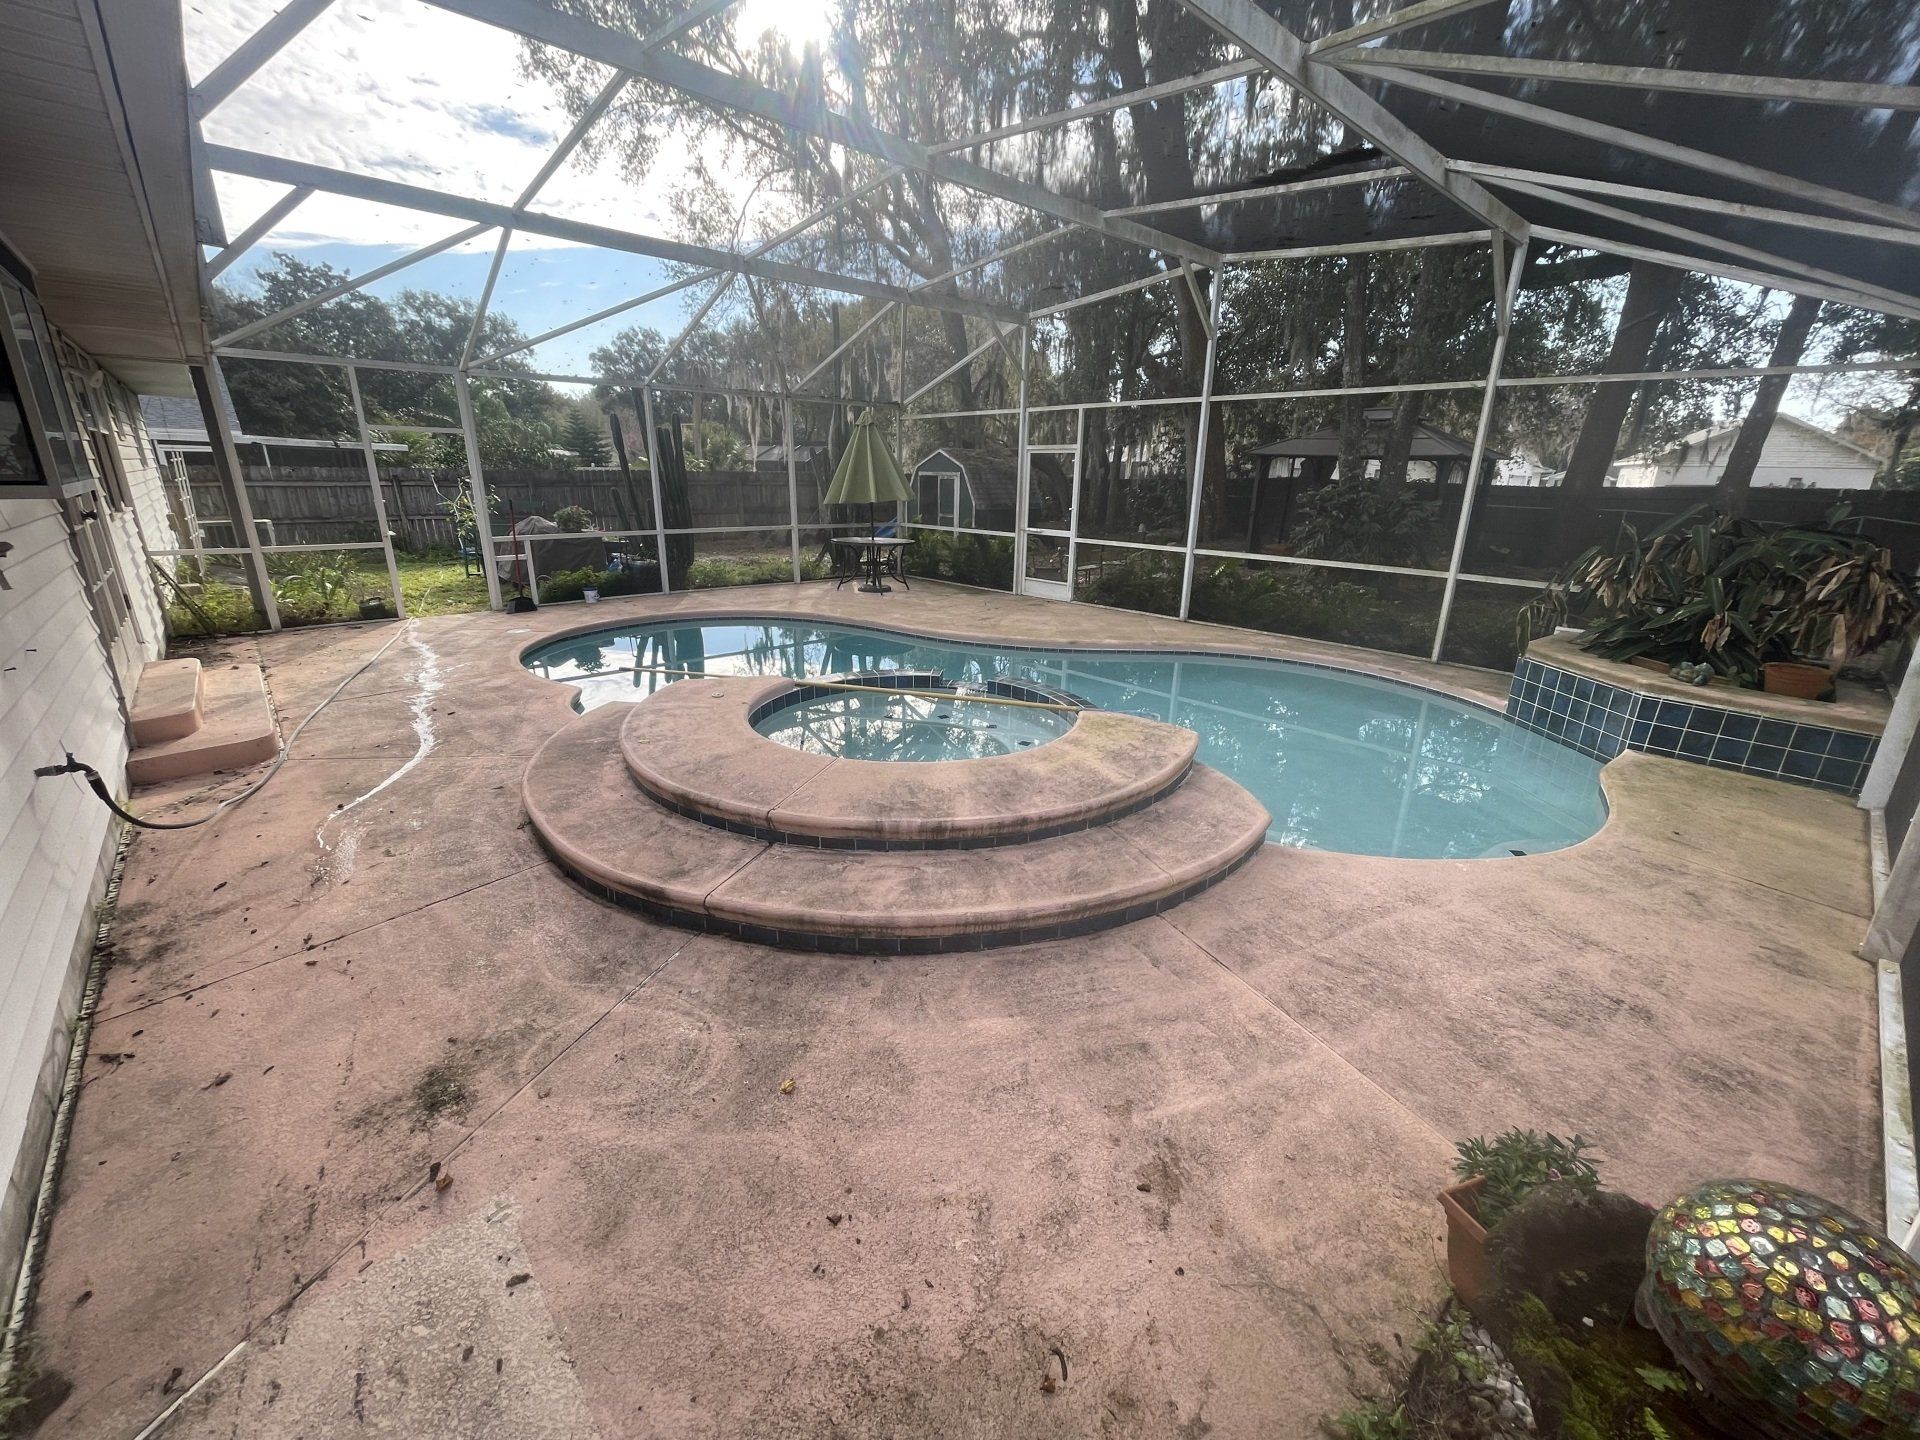 Expert pressure washing for patio and pool deck cleaning in Orlando